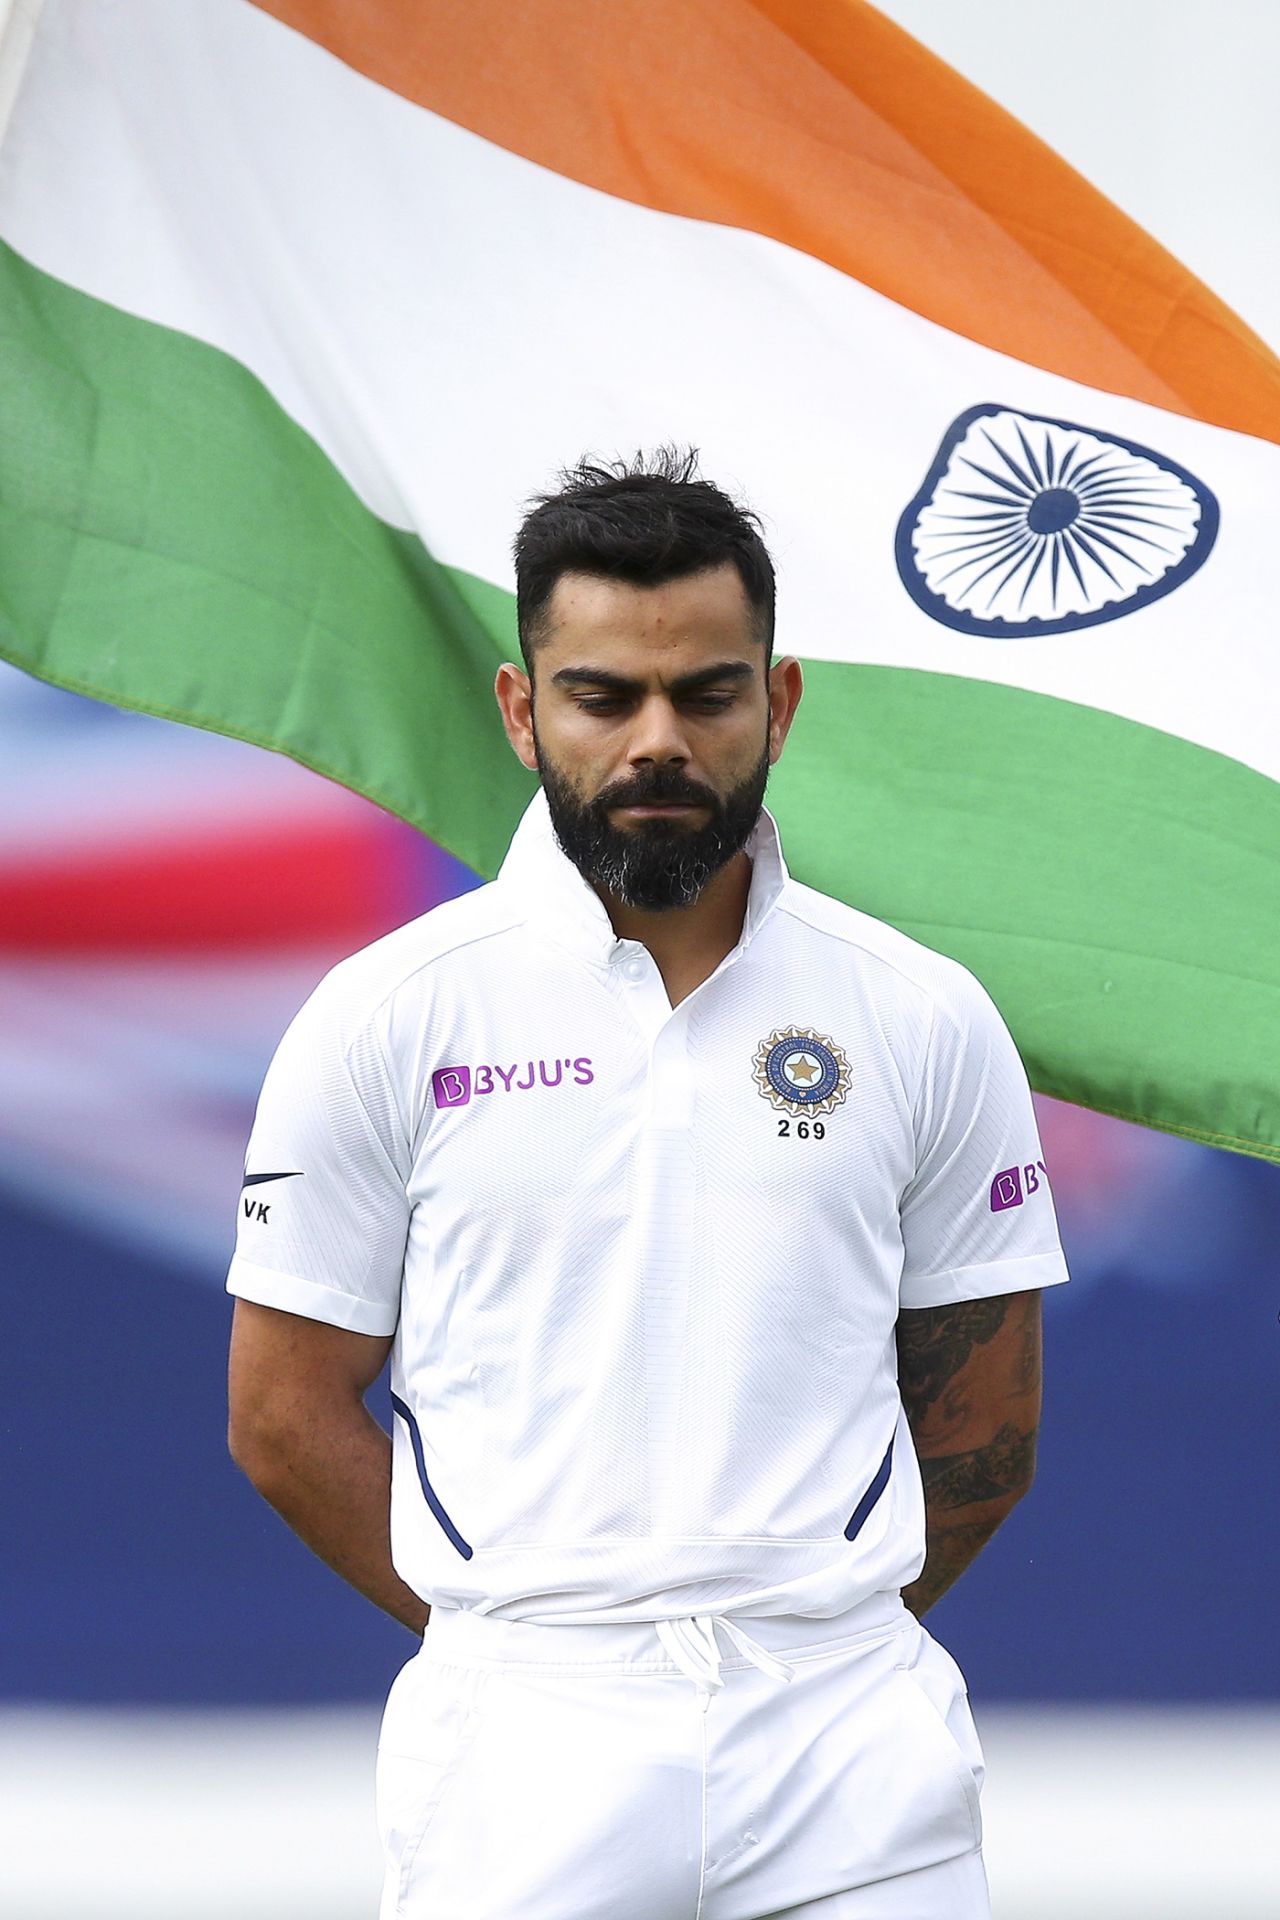 Virat Kohli ponders ahead of his next challenge - a Test series against New Zealand, New Zealand v India, 1st Test, Wellington, 1st day, February 21, 2020